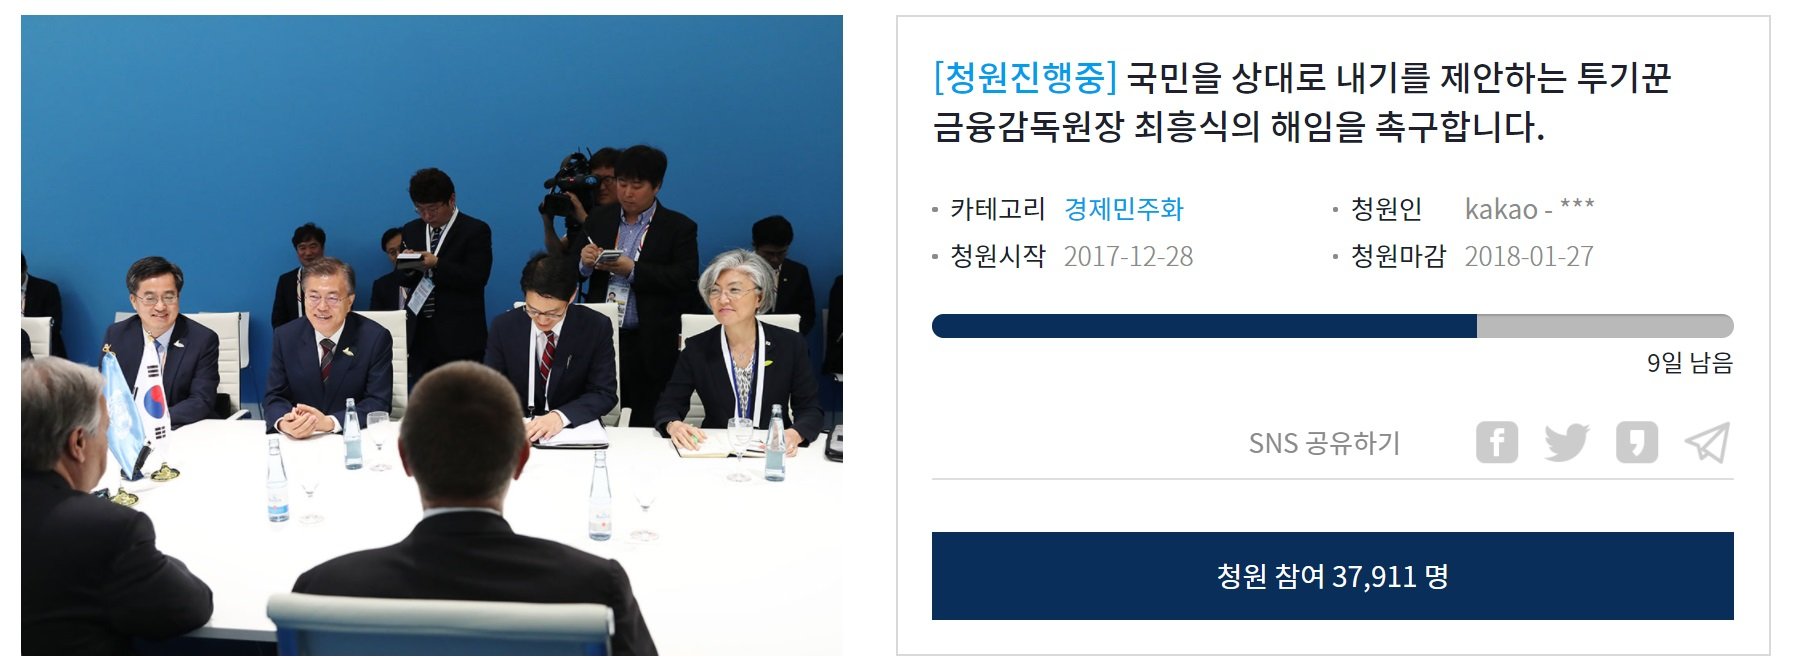 215,000+ Sign Petition Against South Korean Crypto Regulation - Government to Respond